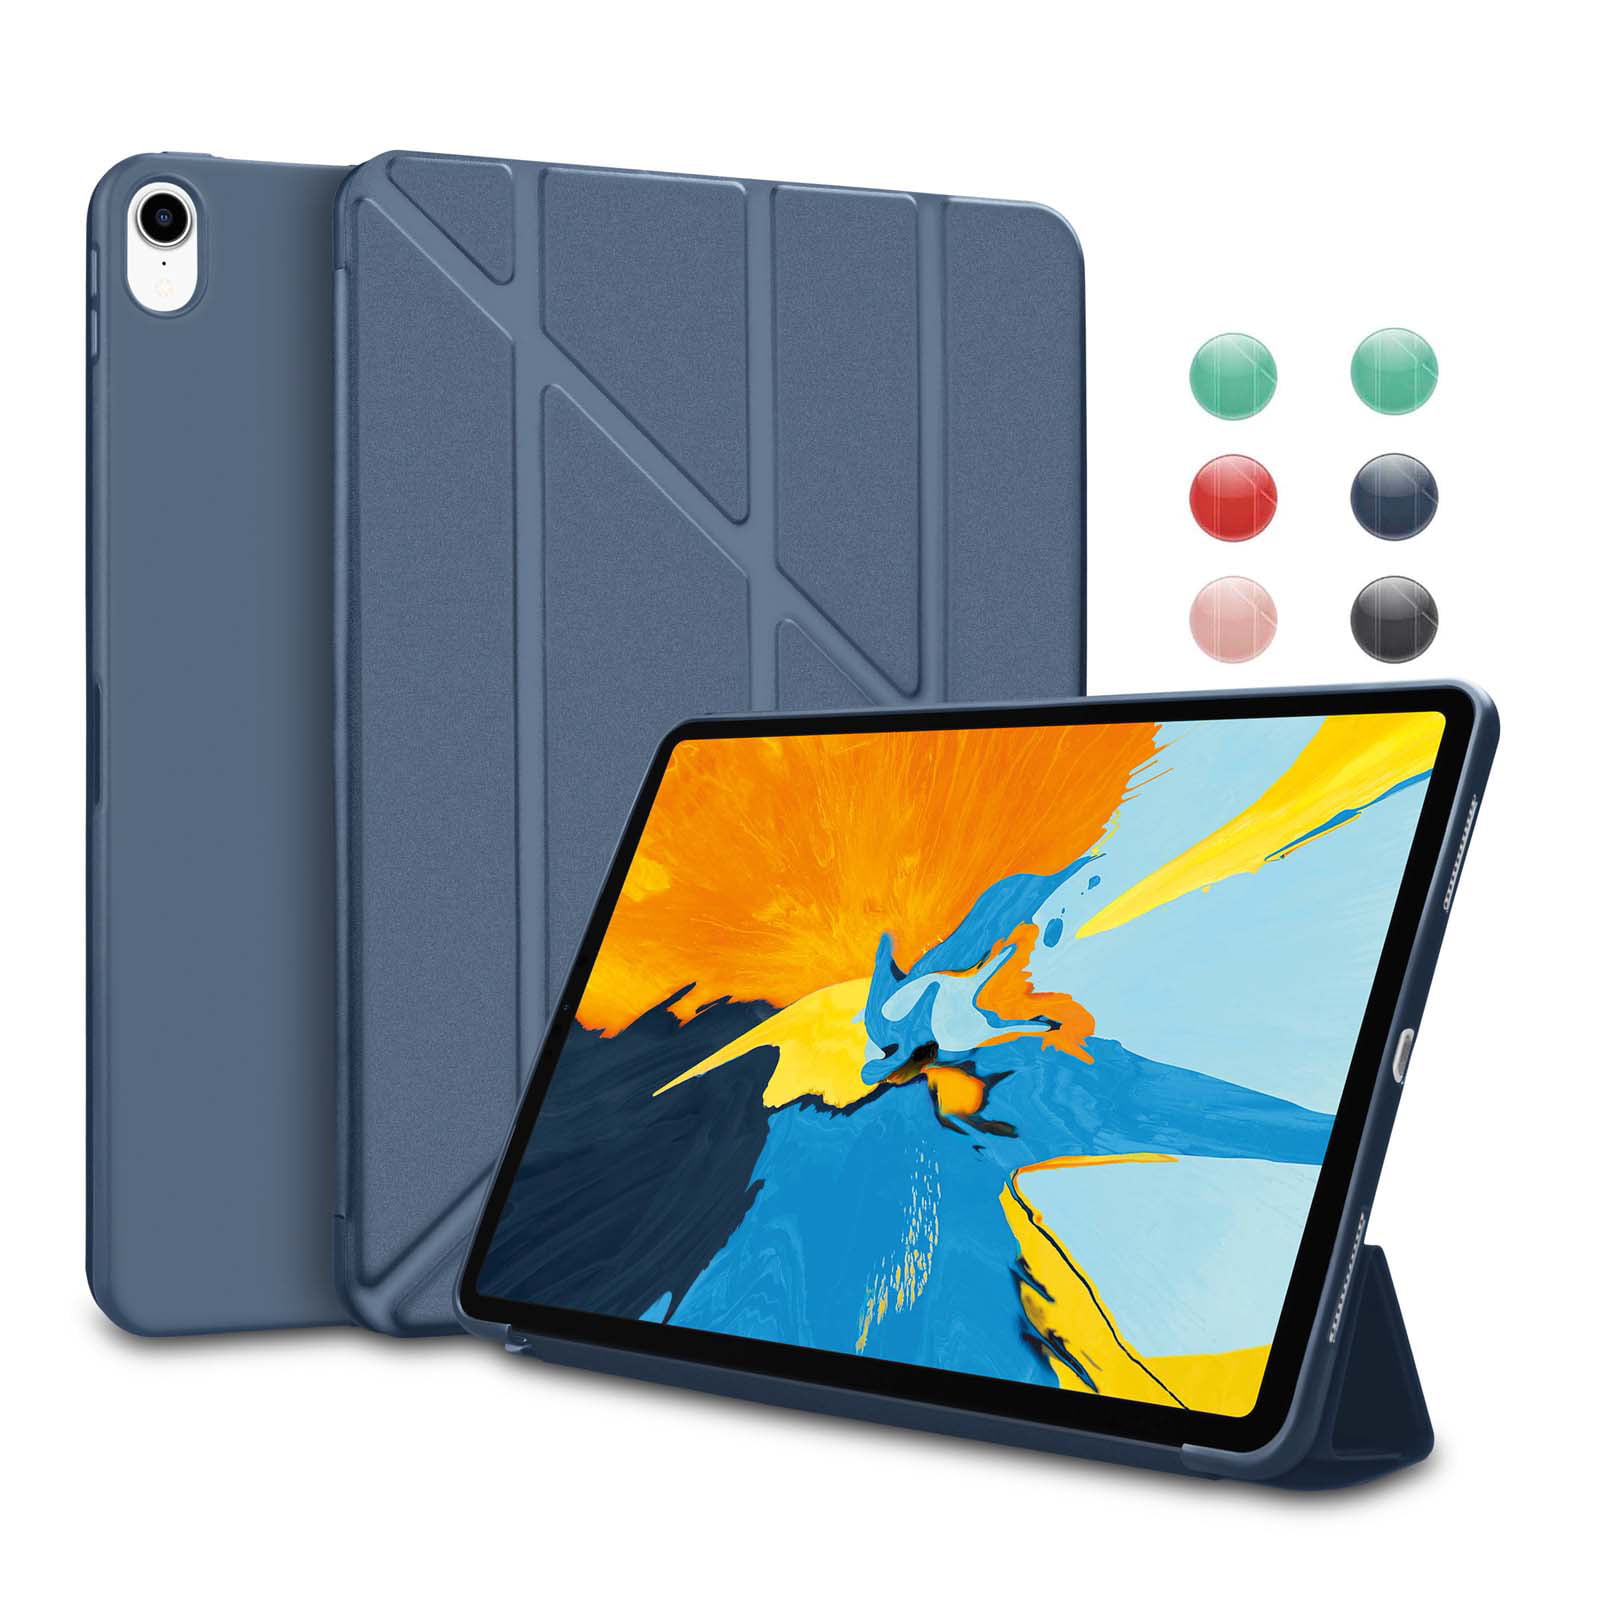 2018 iPad Pro 11 Case, Cases Cover For A1980 A2013 A1934 A1979